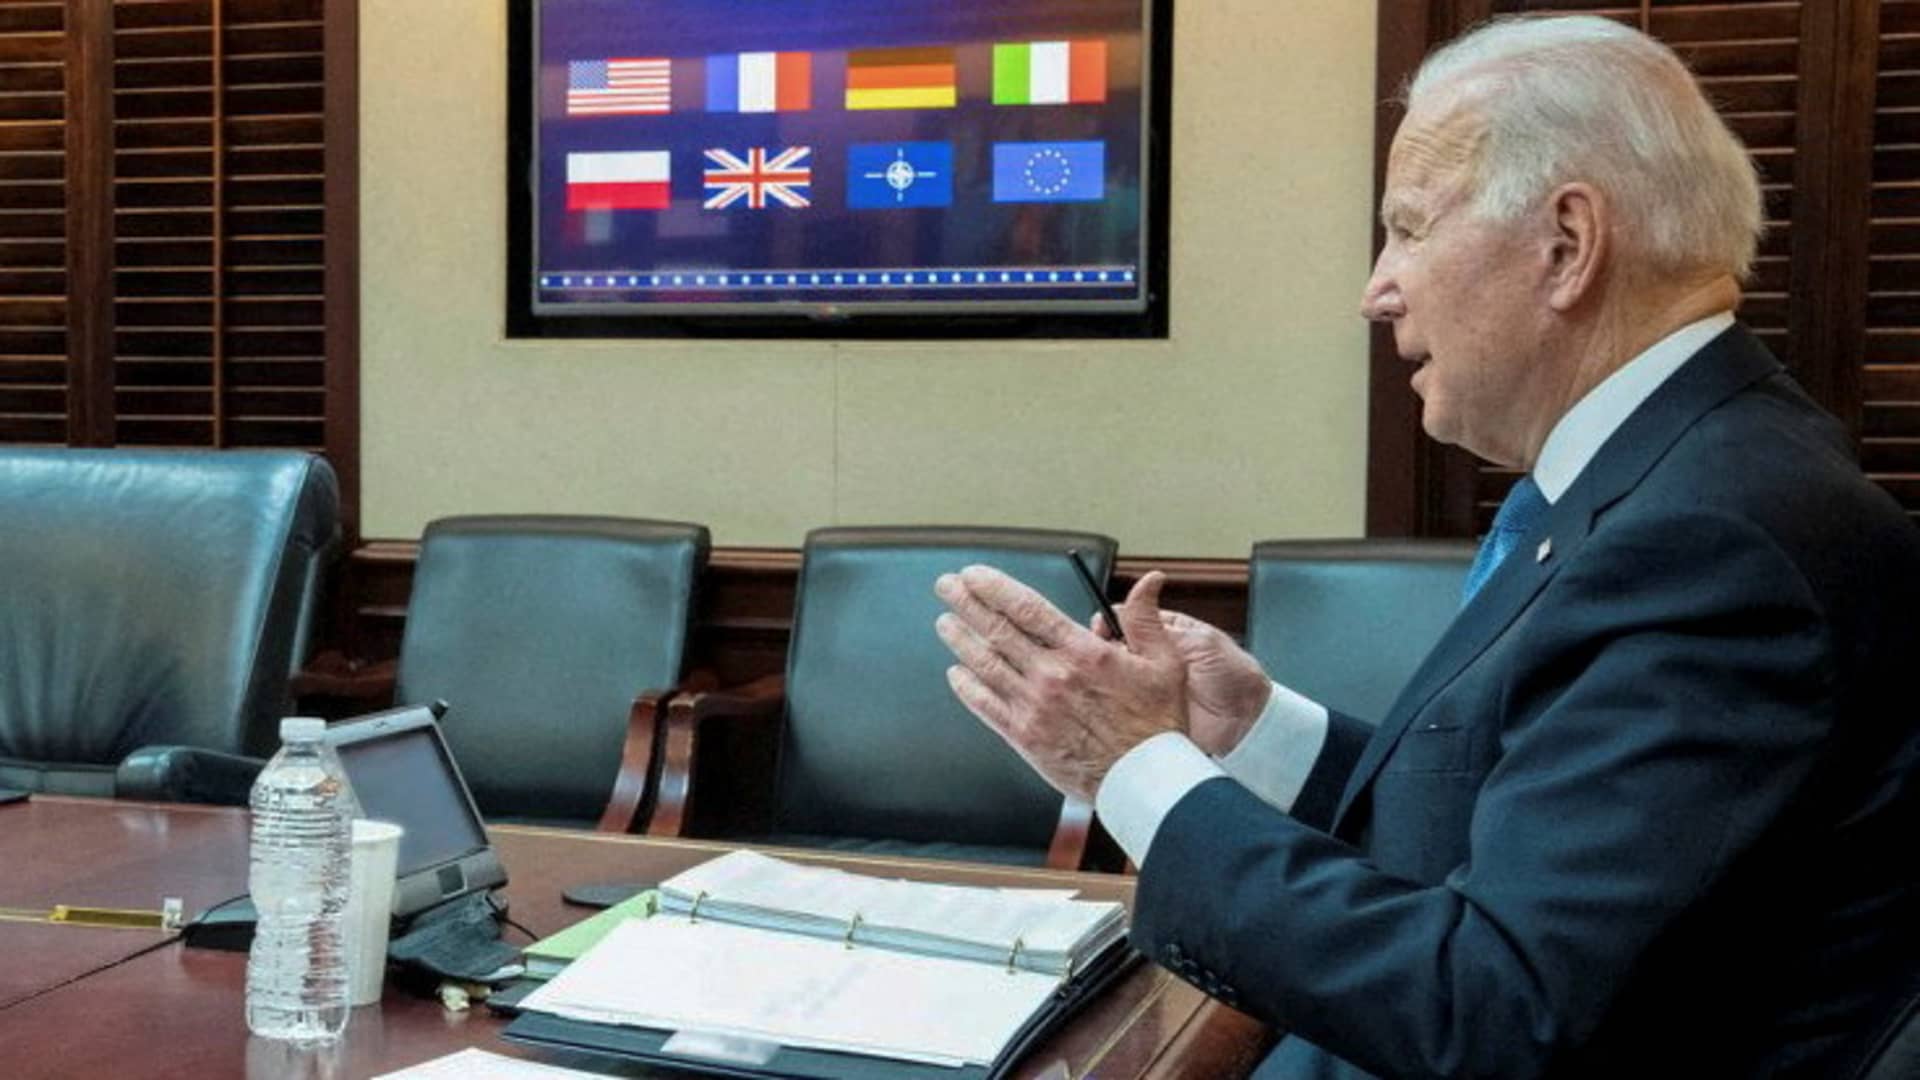 U.S. President Joe Biden is seen in a White House handout photo as he speaks with European leaders about Russia and the situation in Ukraine during a secure video teleconference from the Situation Room of the White House in Washington, January 24, 2022.